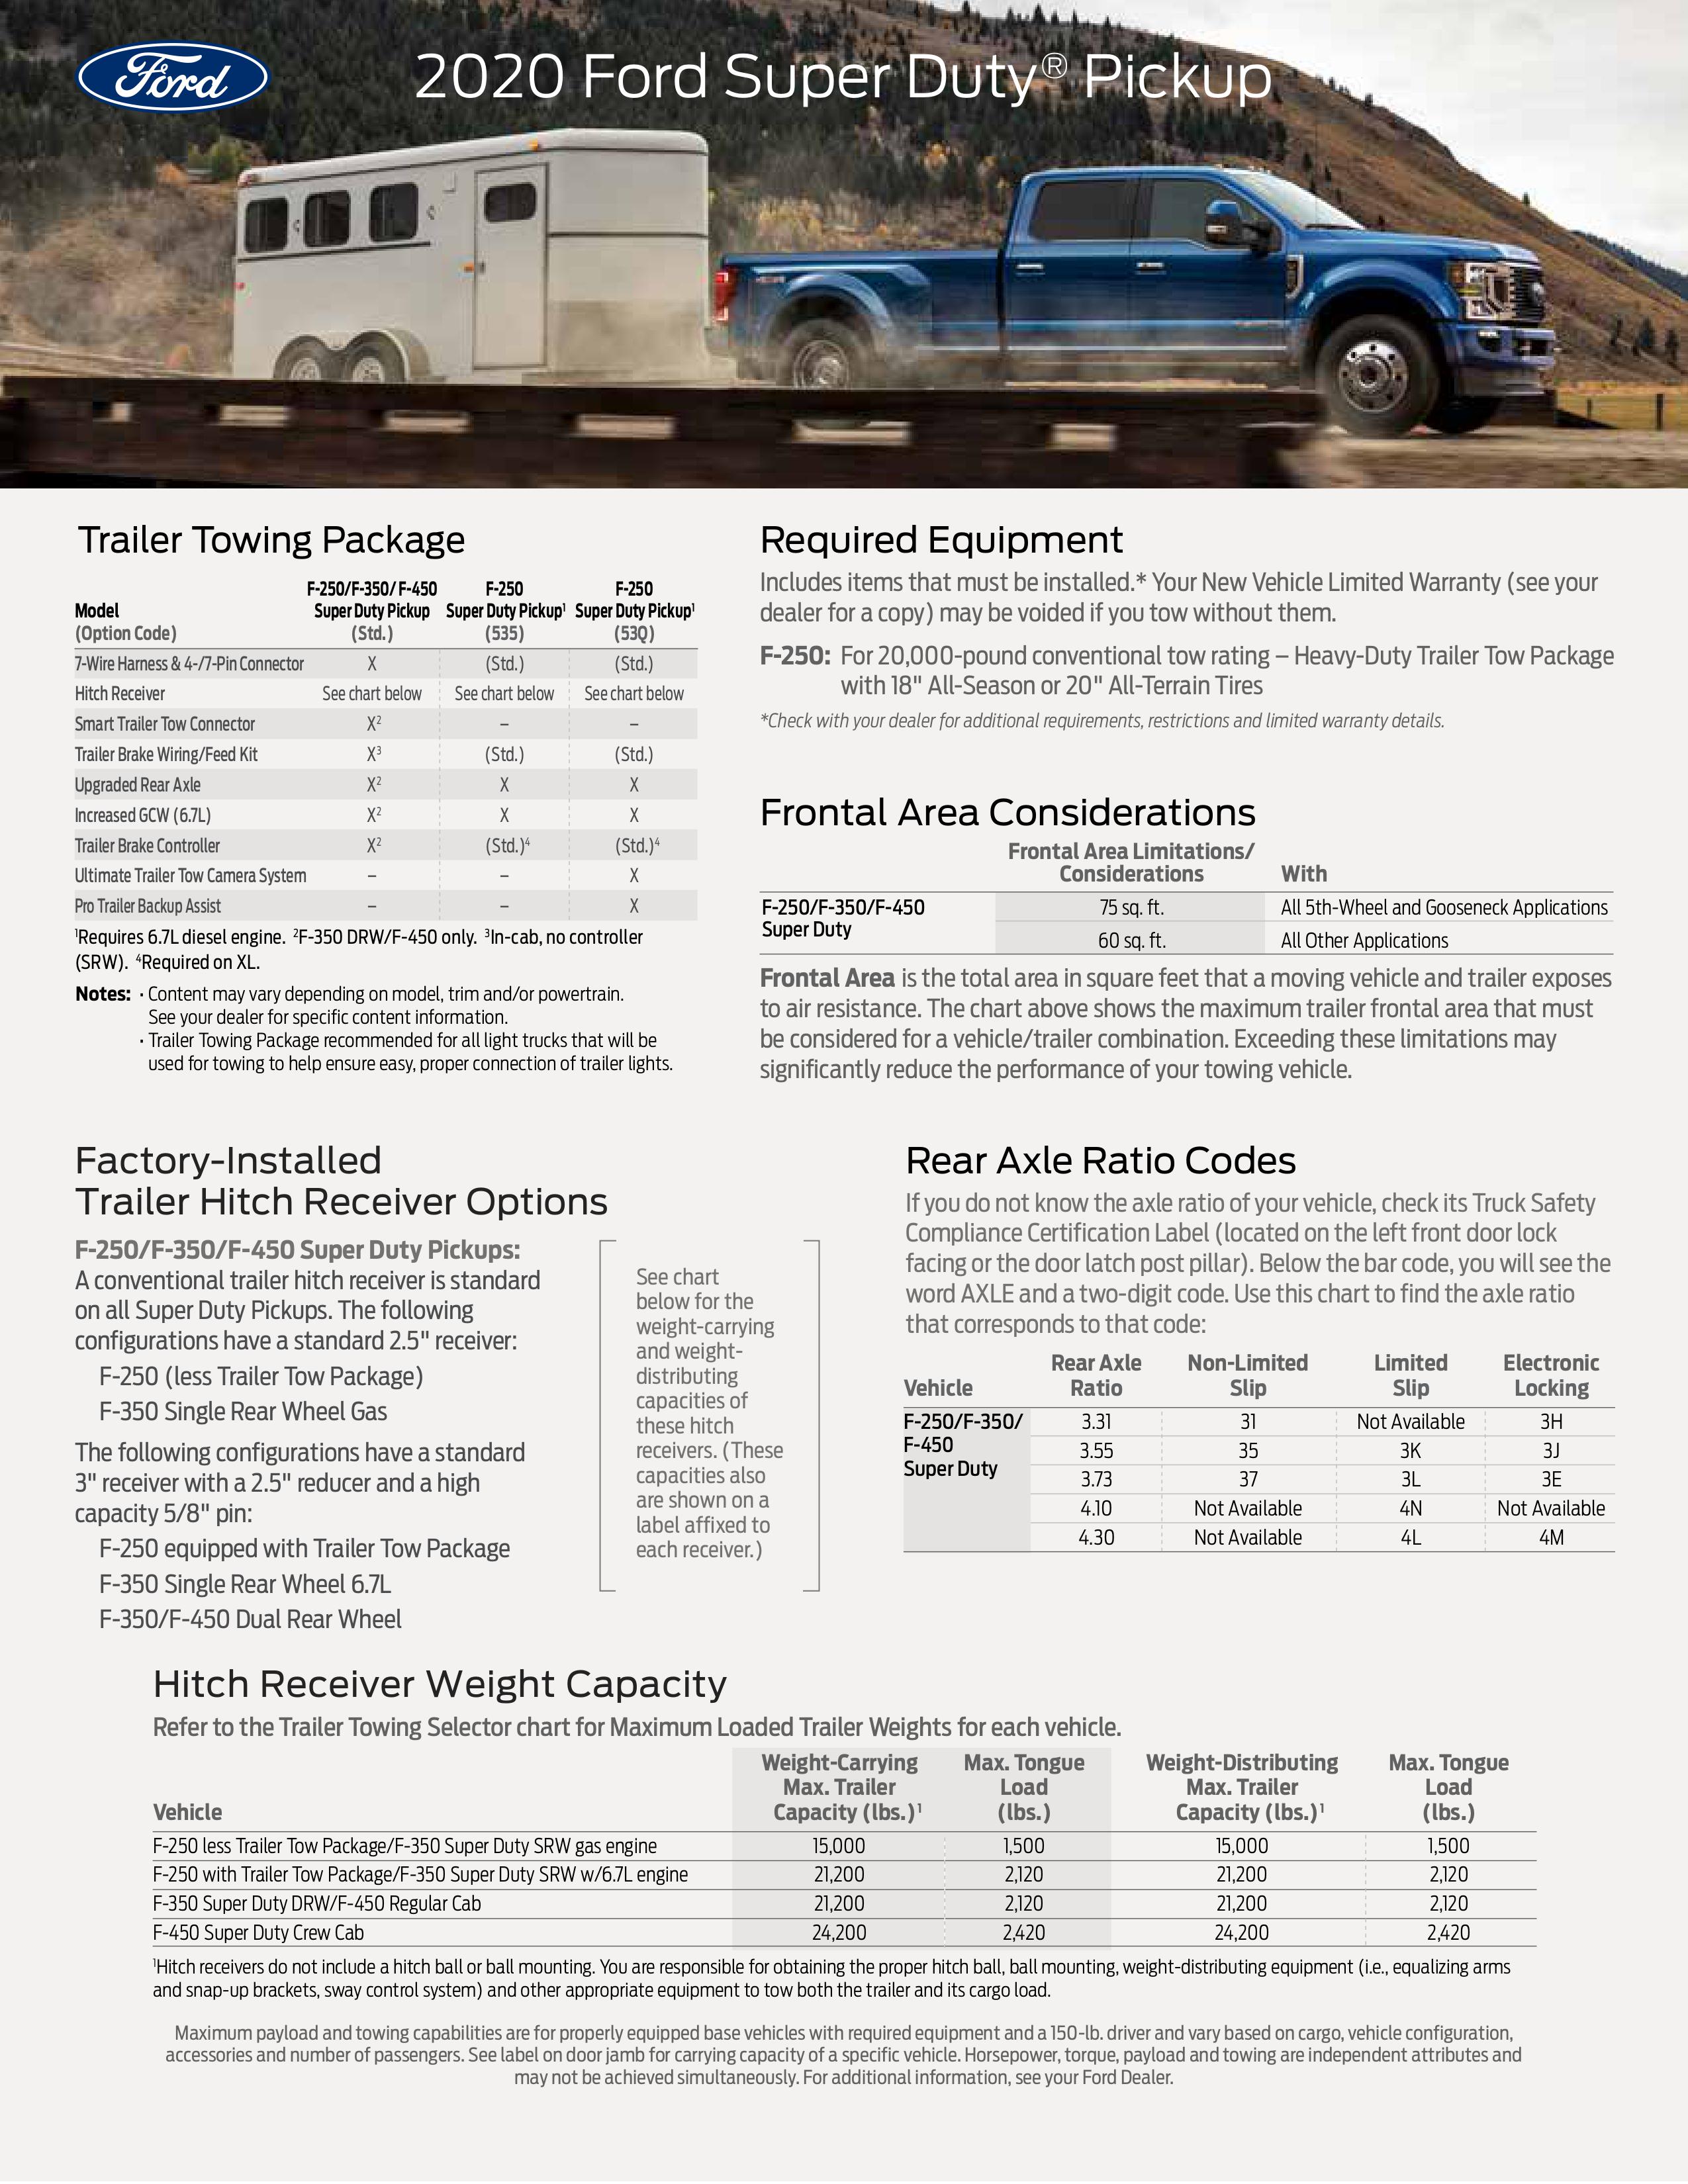 2020 Super Duty Towing Guide | Corning Ford 2020 Ford Rv And Trailer Towing Guide